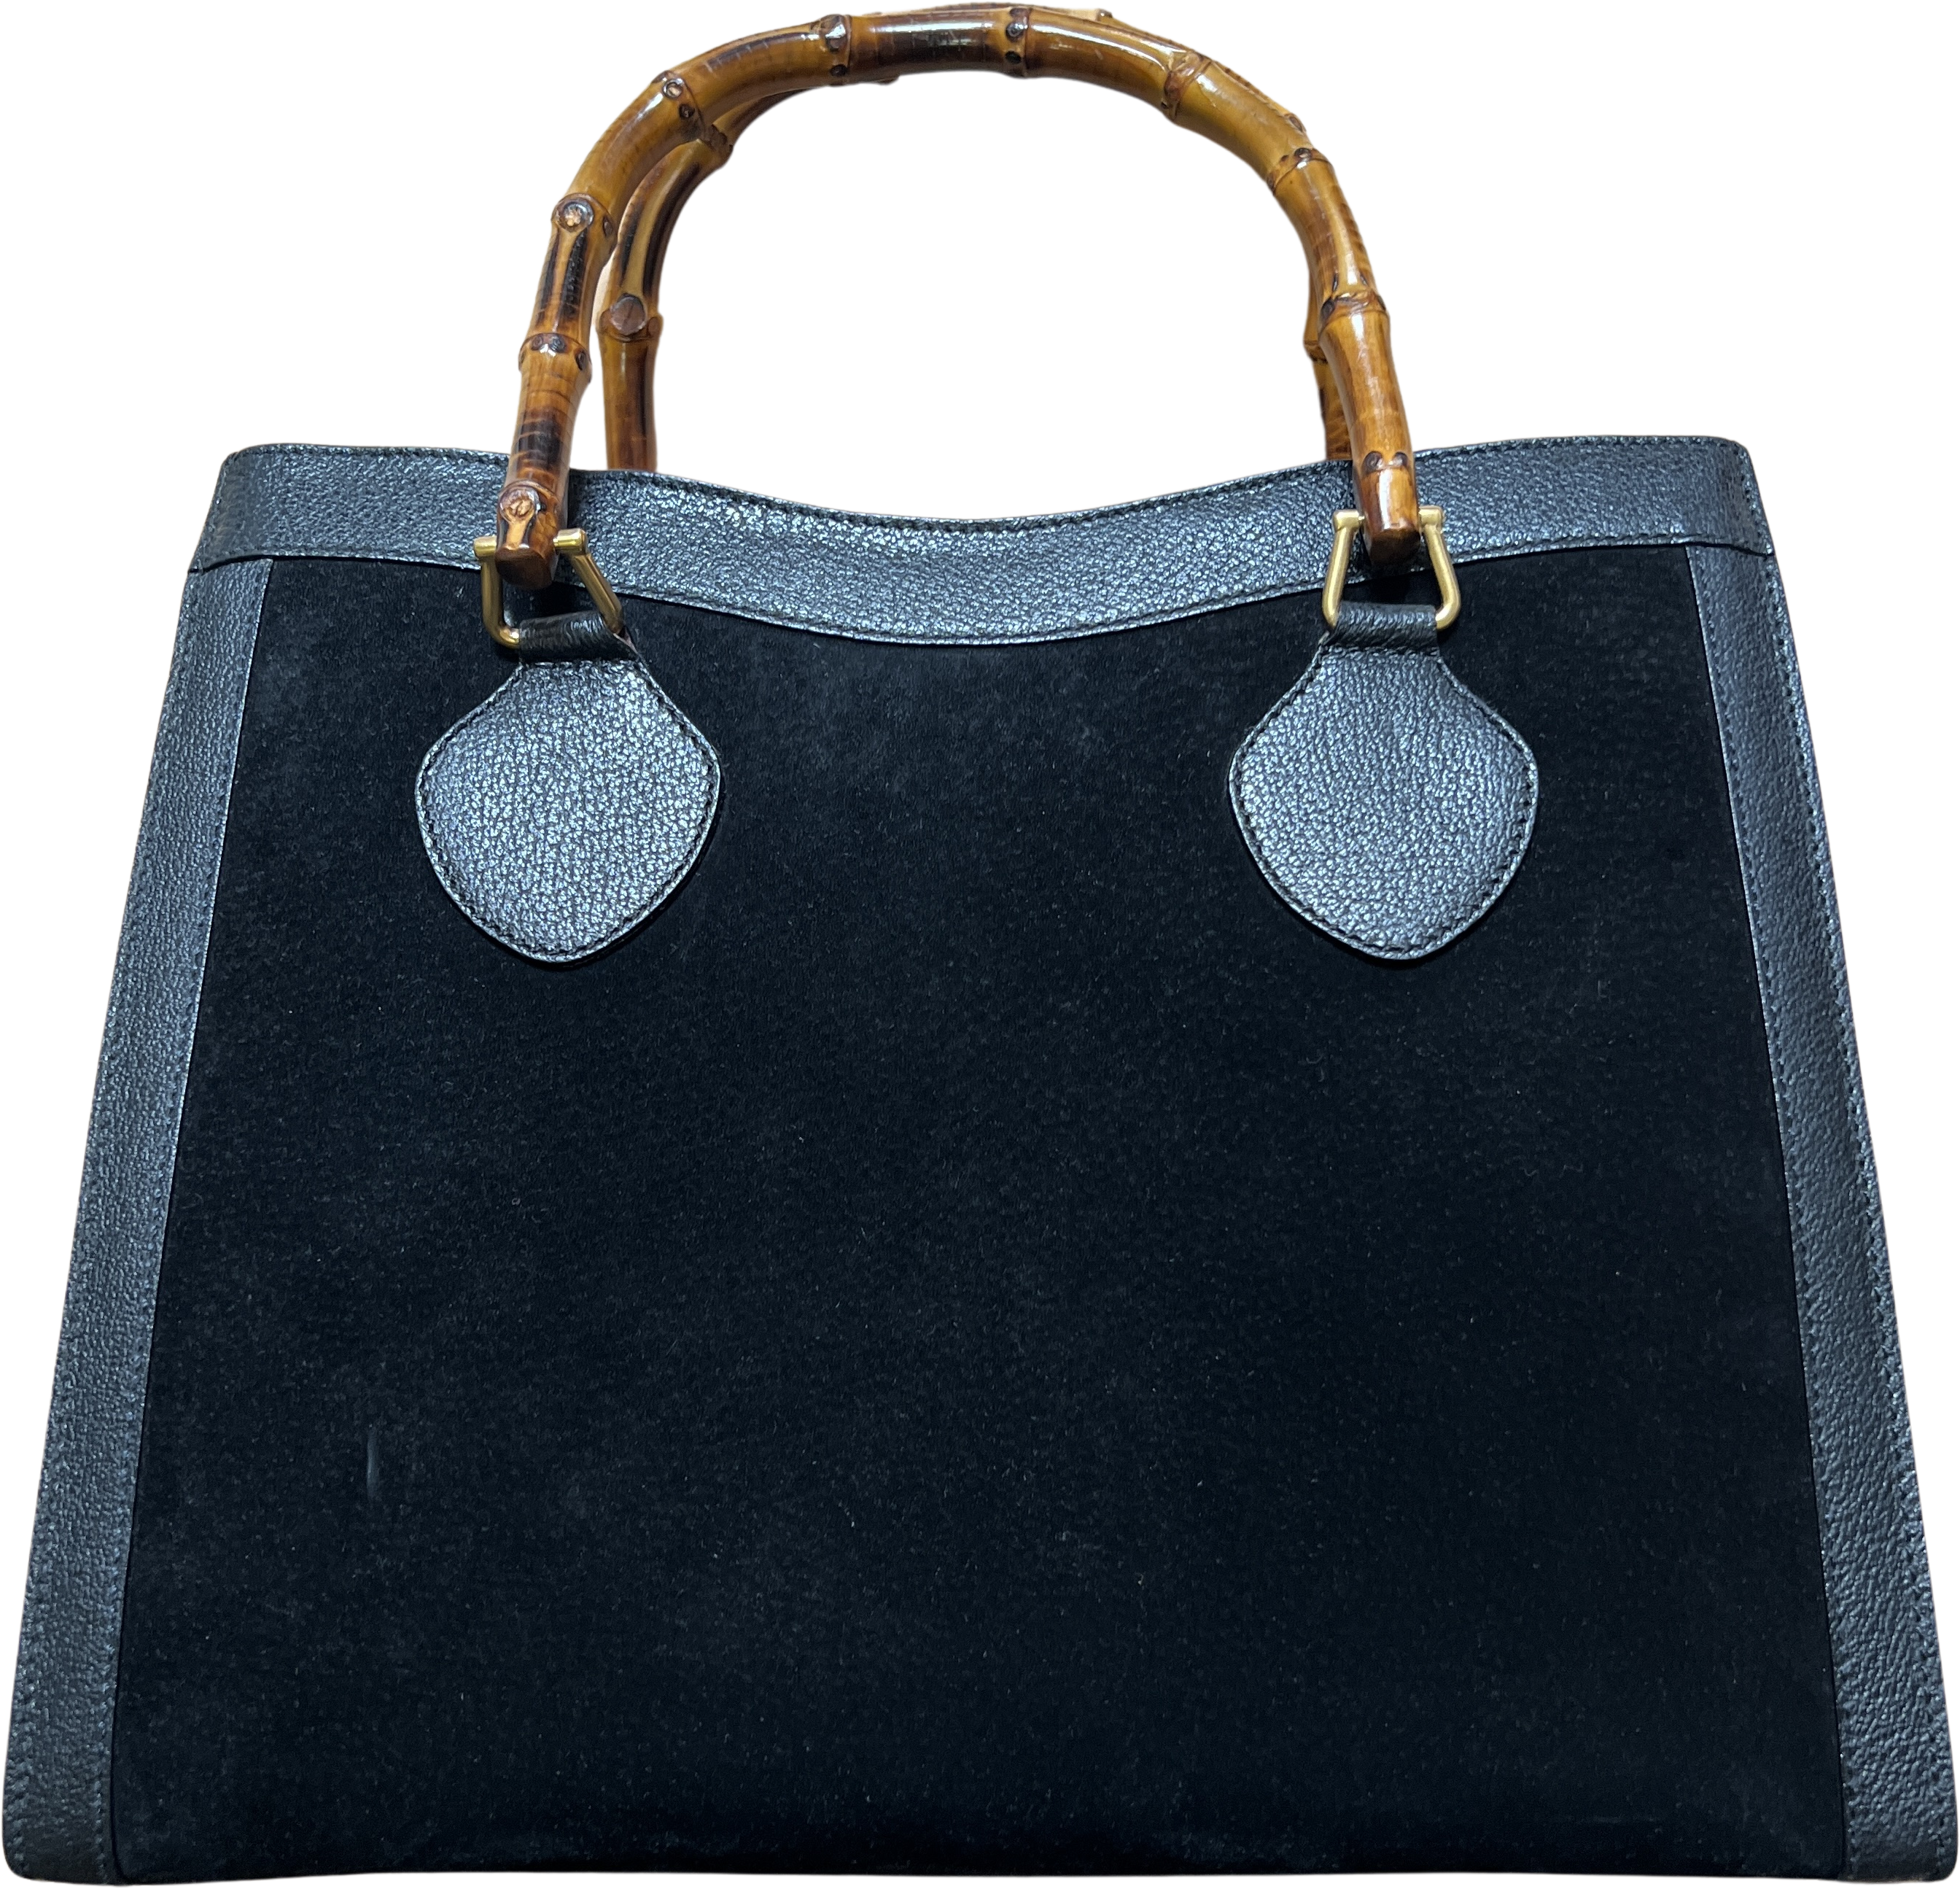 Gucci Vintage Navy Leather Bag with Bamboo Handle - circa 1950's